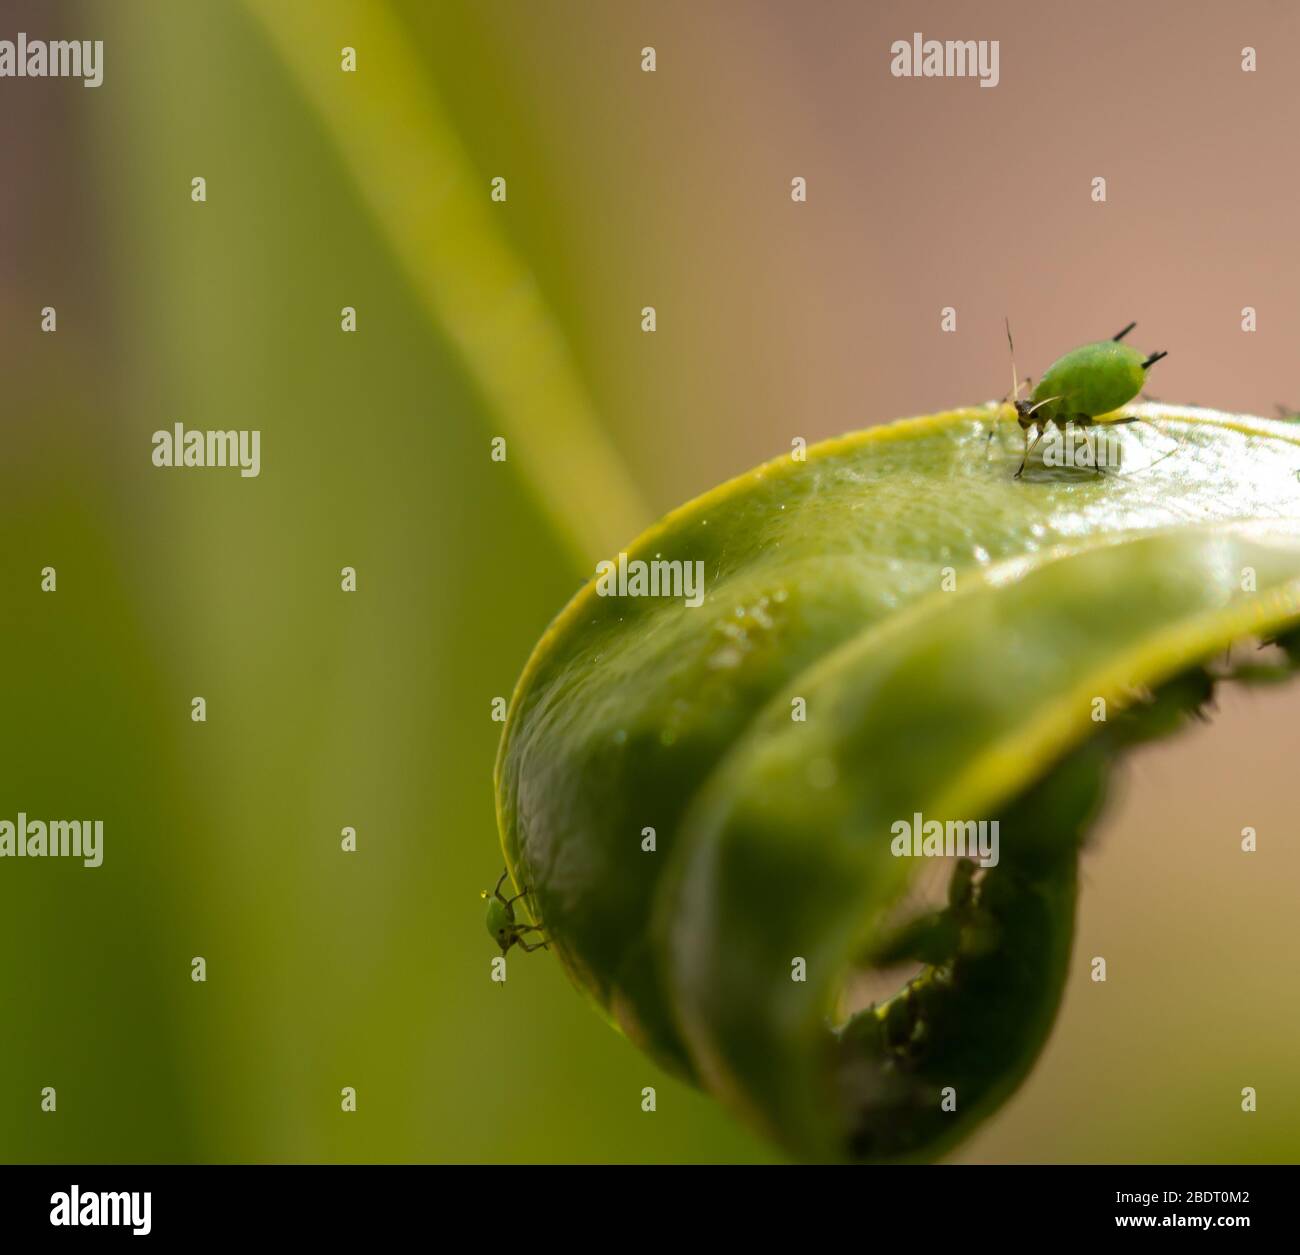 Aphids of different sizes on green leaves of a fruit tree Stock Photo